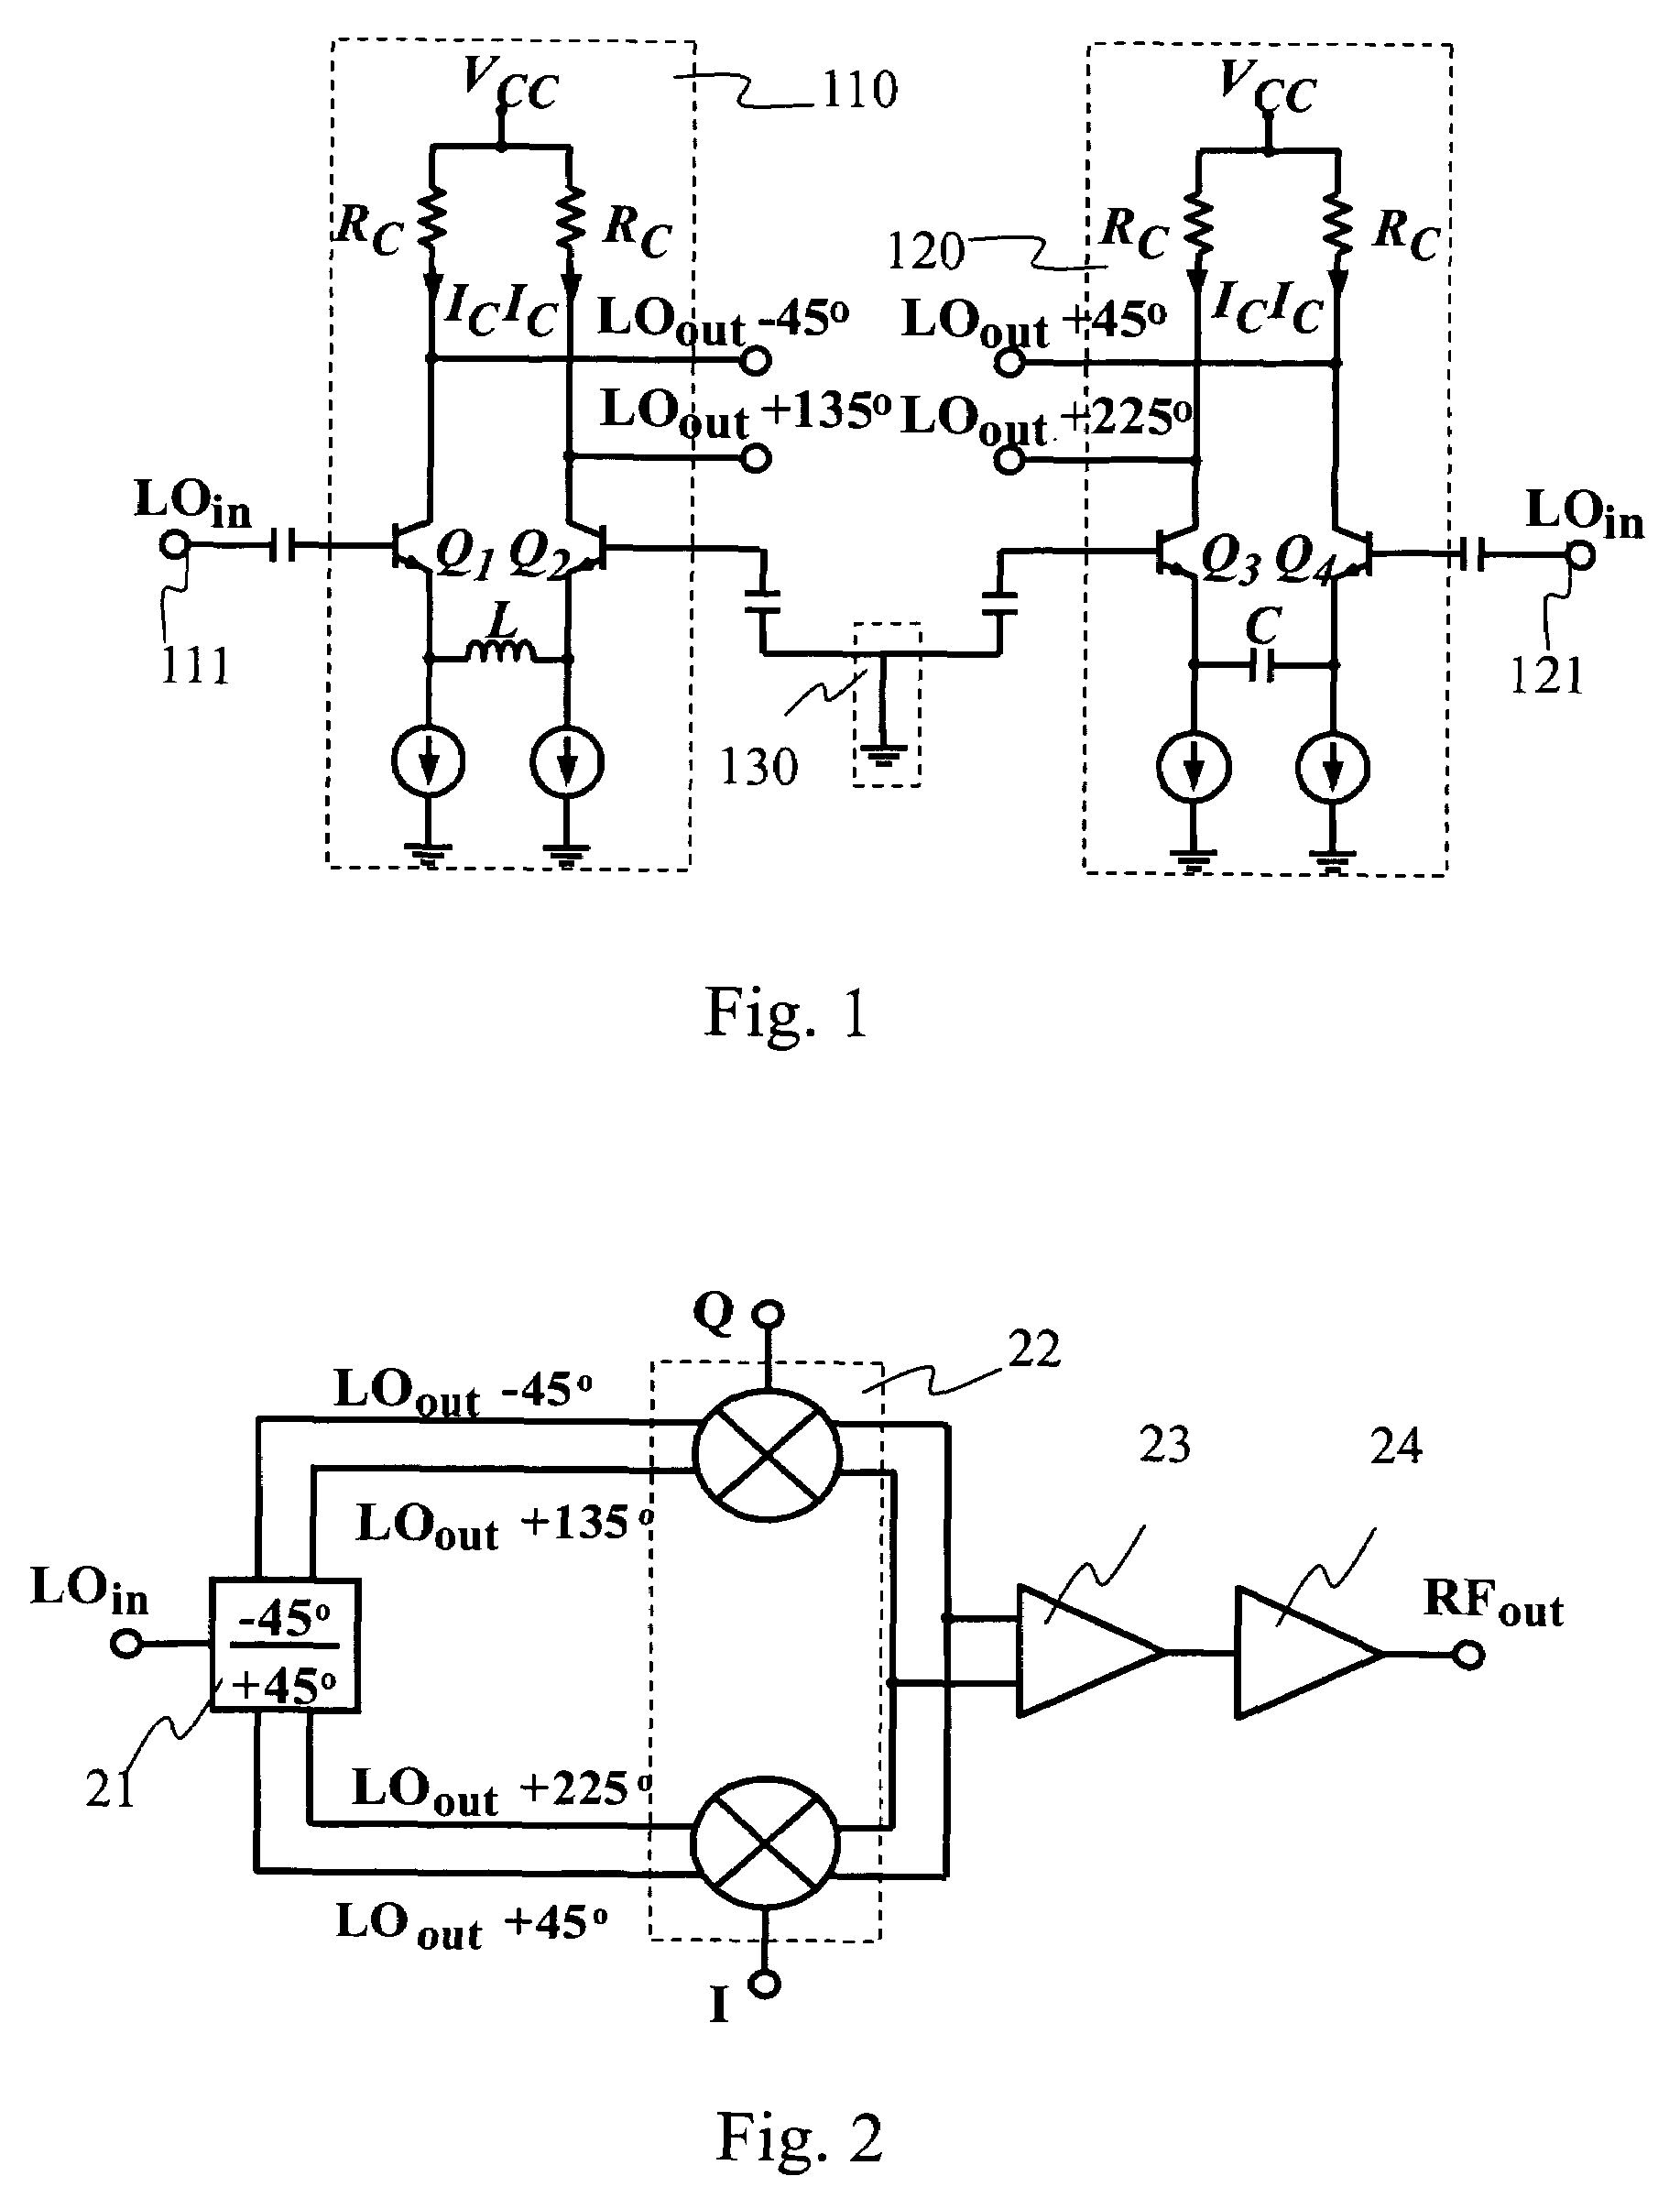 Active 90-degree phase shifter with LC-type emitter degeneration and quadrature modulator IC using the same